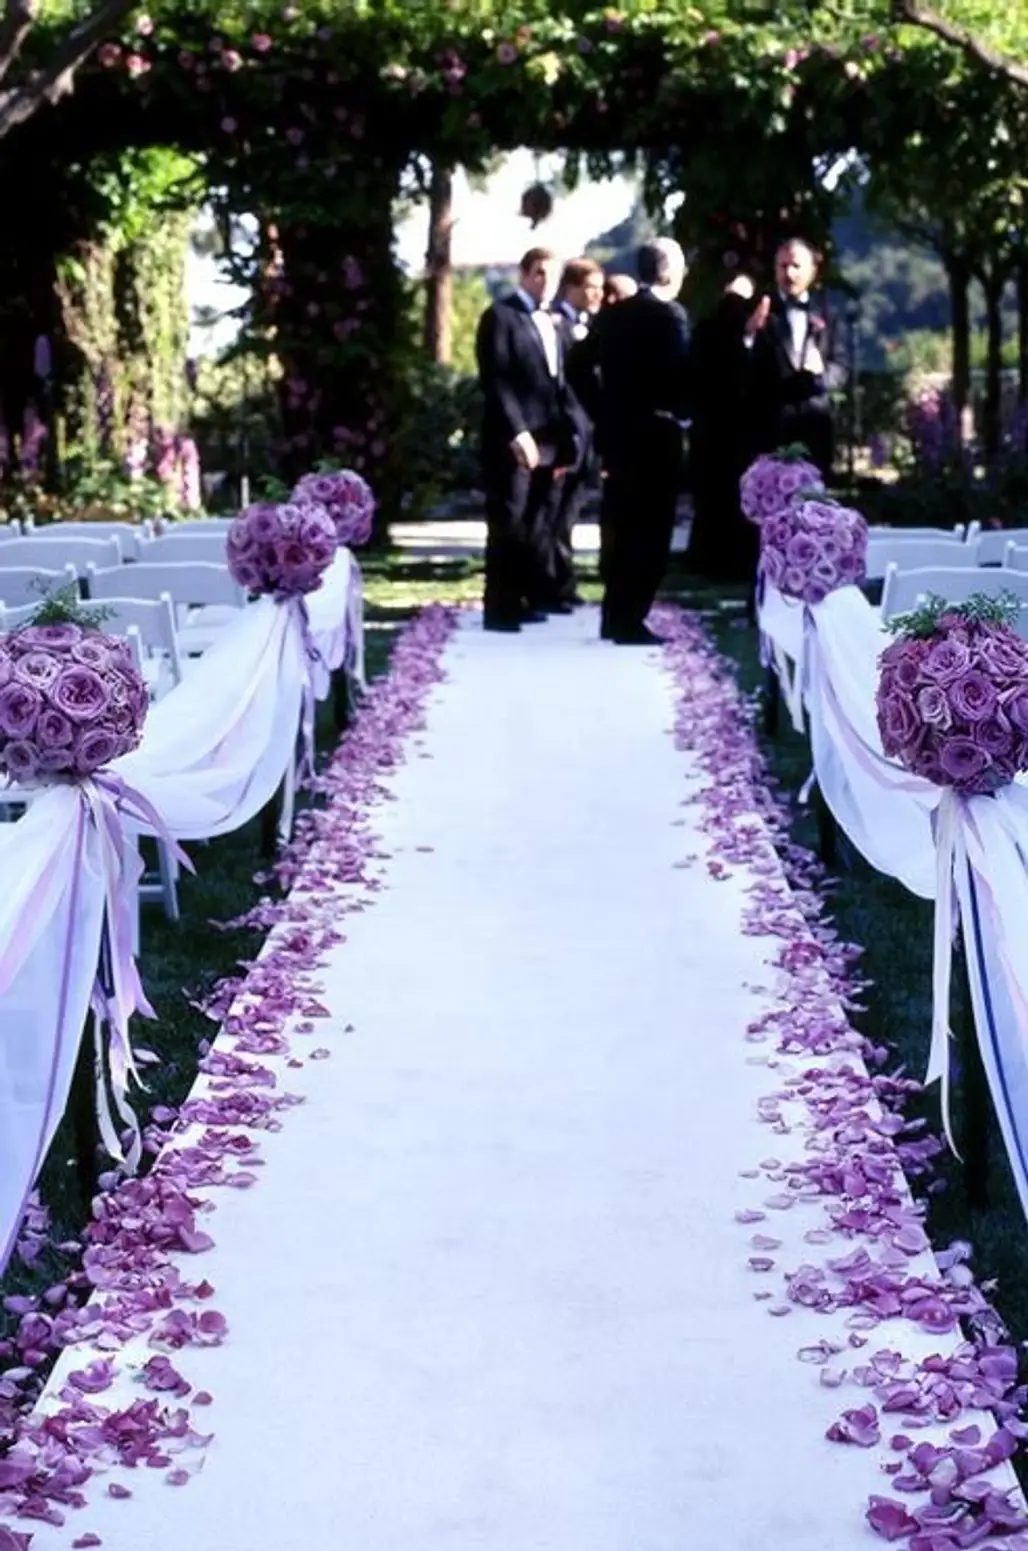 Pomanders of Purple Roses, Scattered Petals and Purple Satin Ribbons